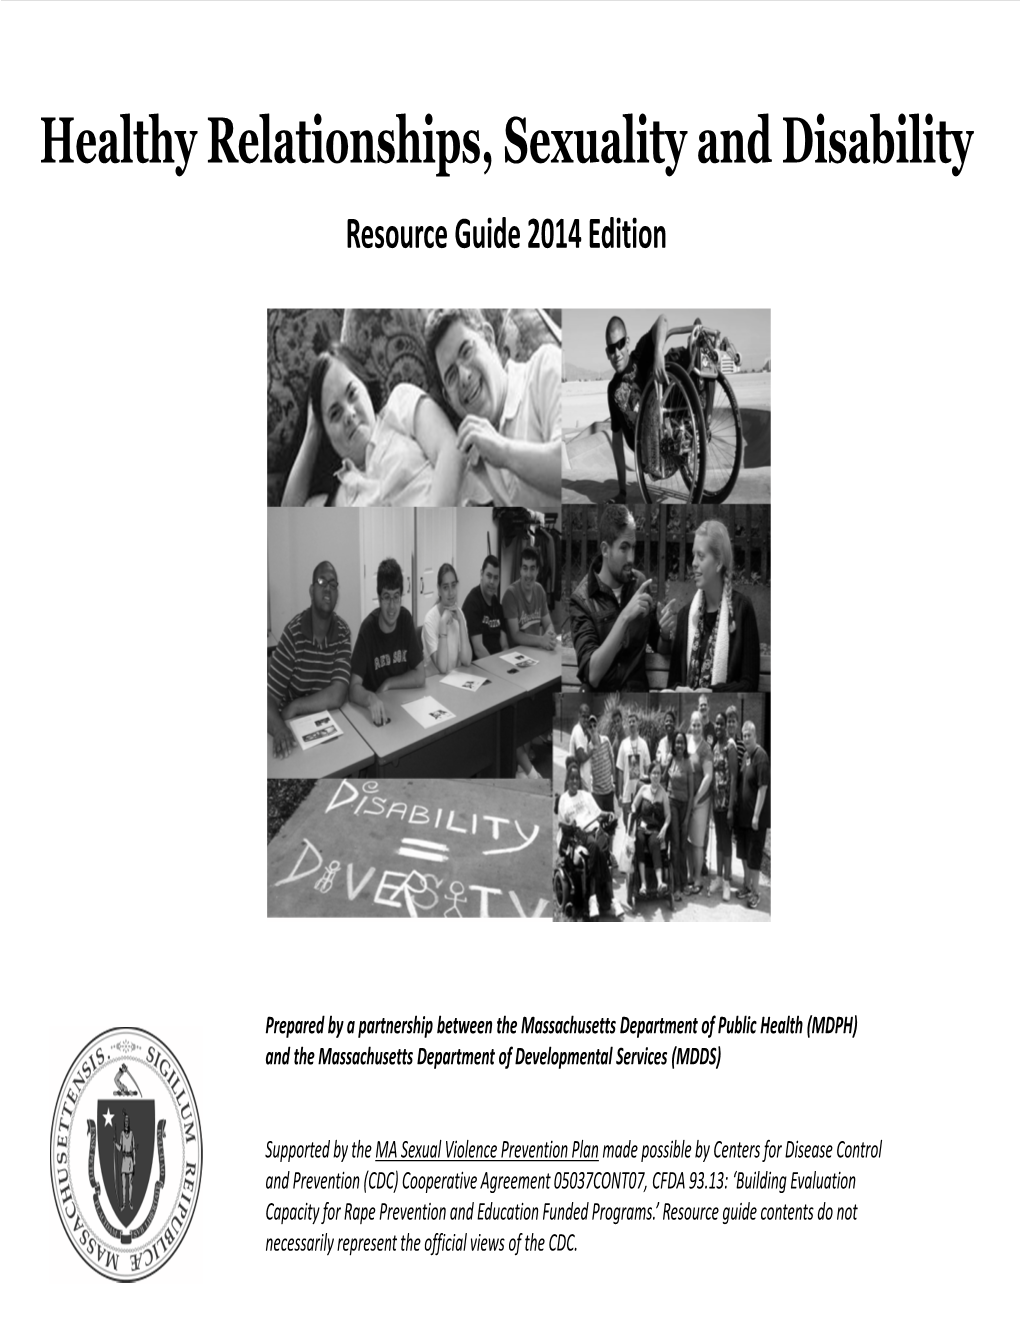 Healthy Relationships, Sexuality and Disability Resource Guide 2014 Edition